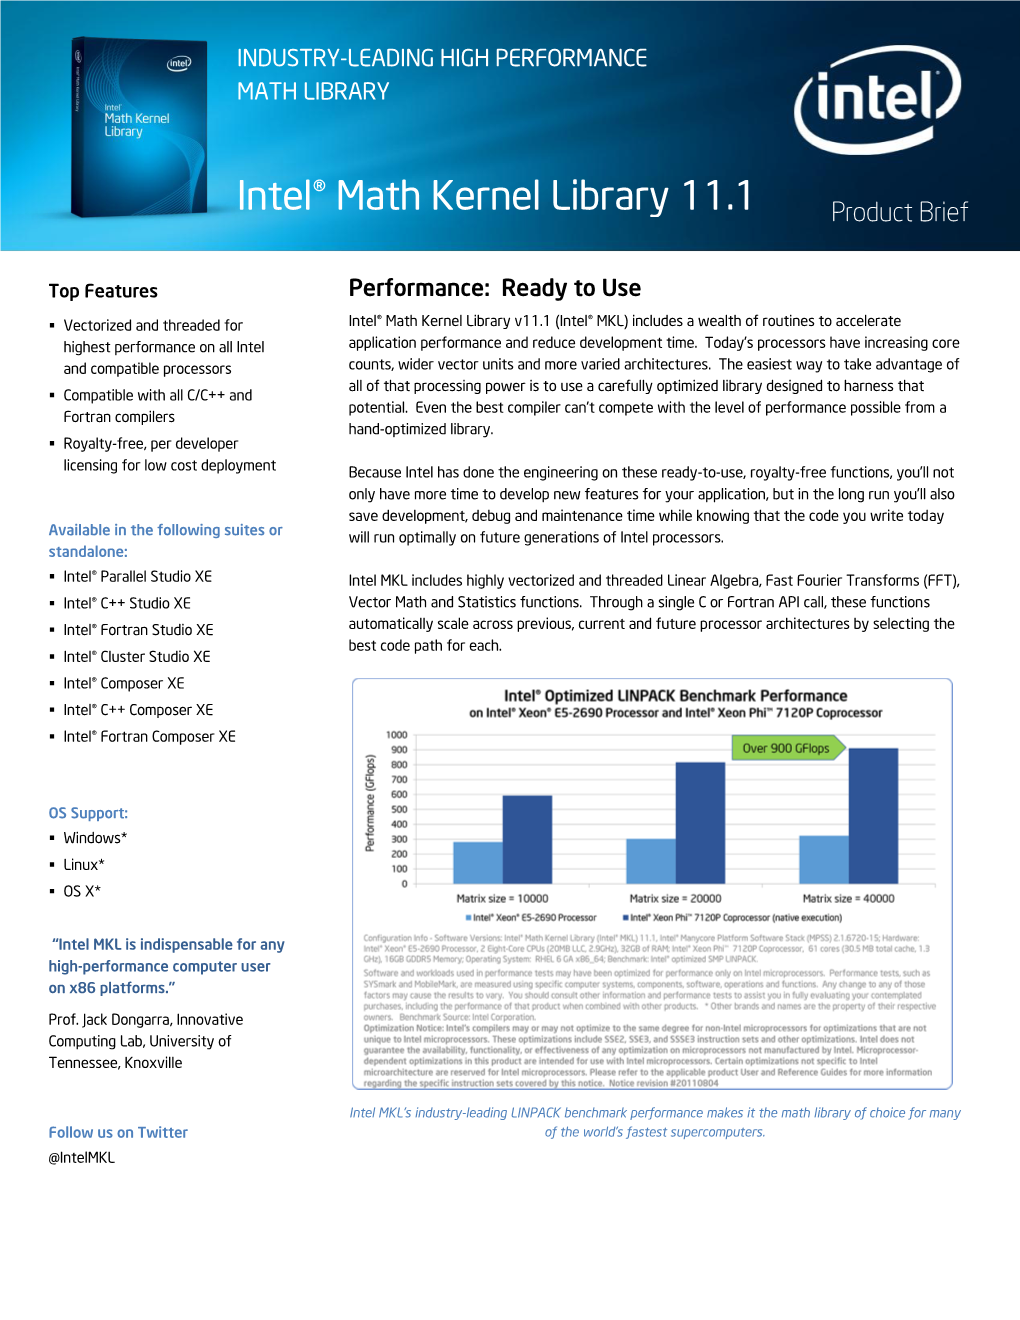 Intel® Math Kernel Library 11.1 Product Brief